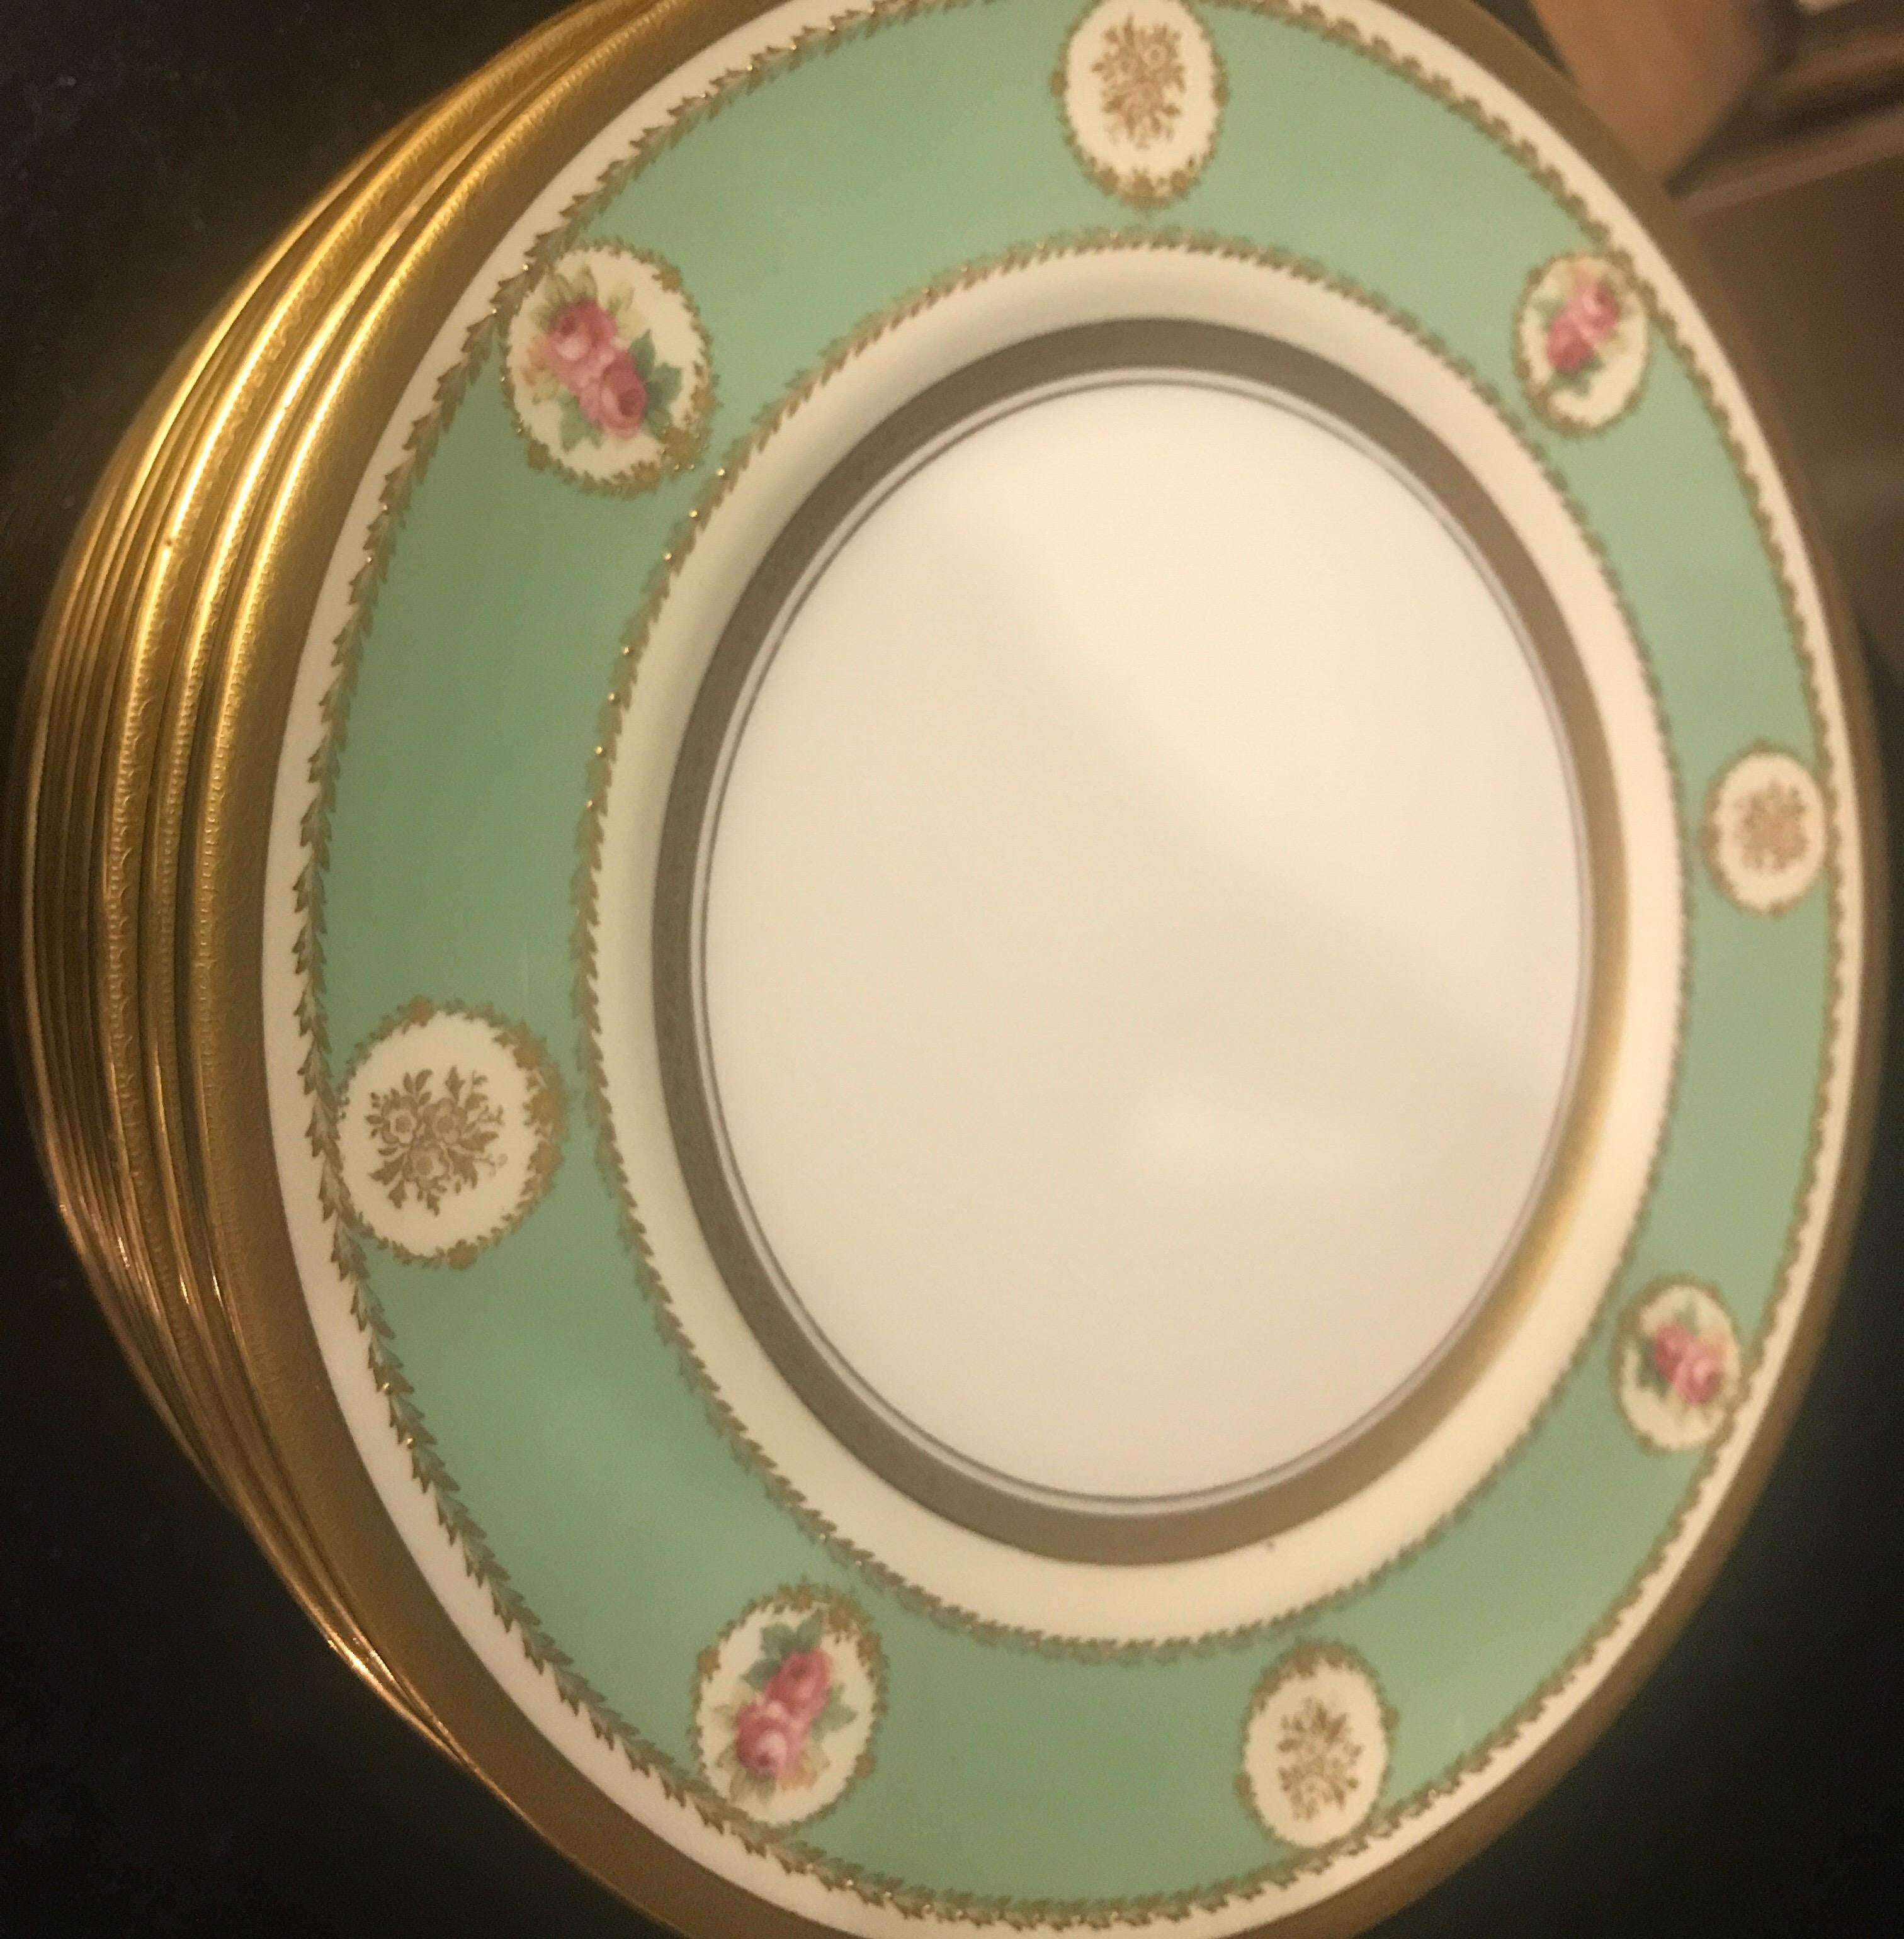 Set 12 English Accent Plates by Herbert Betteley for Doulton 1